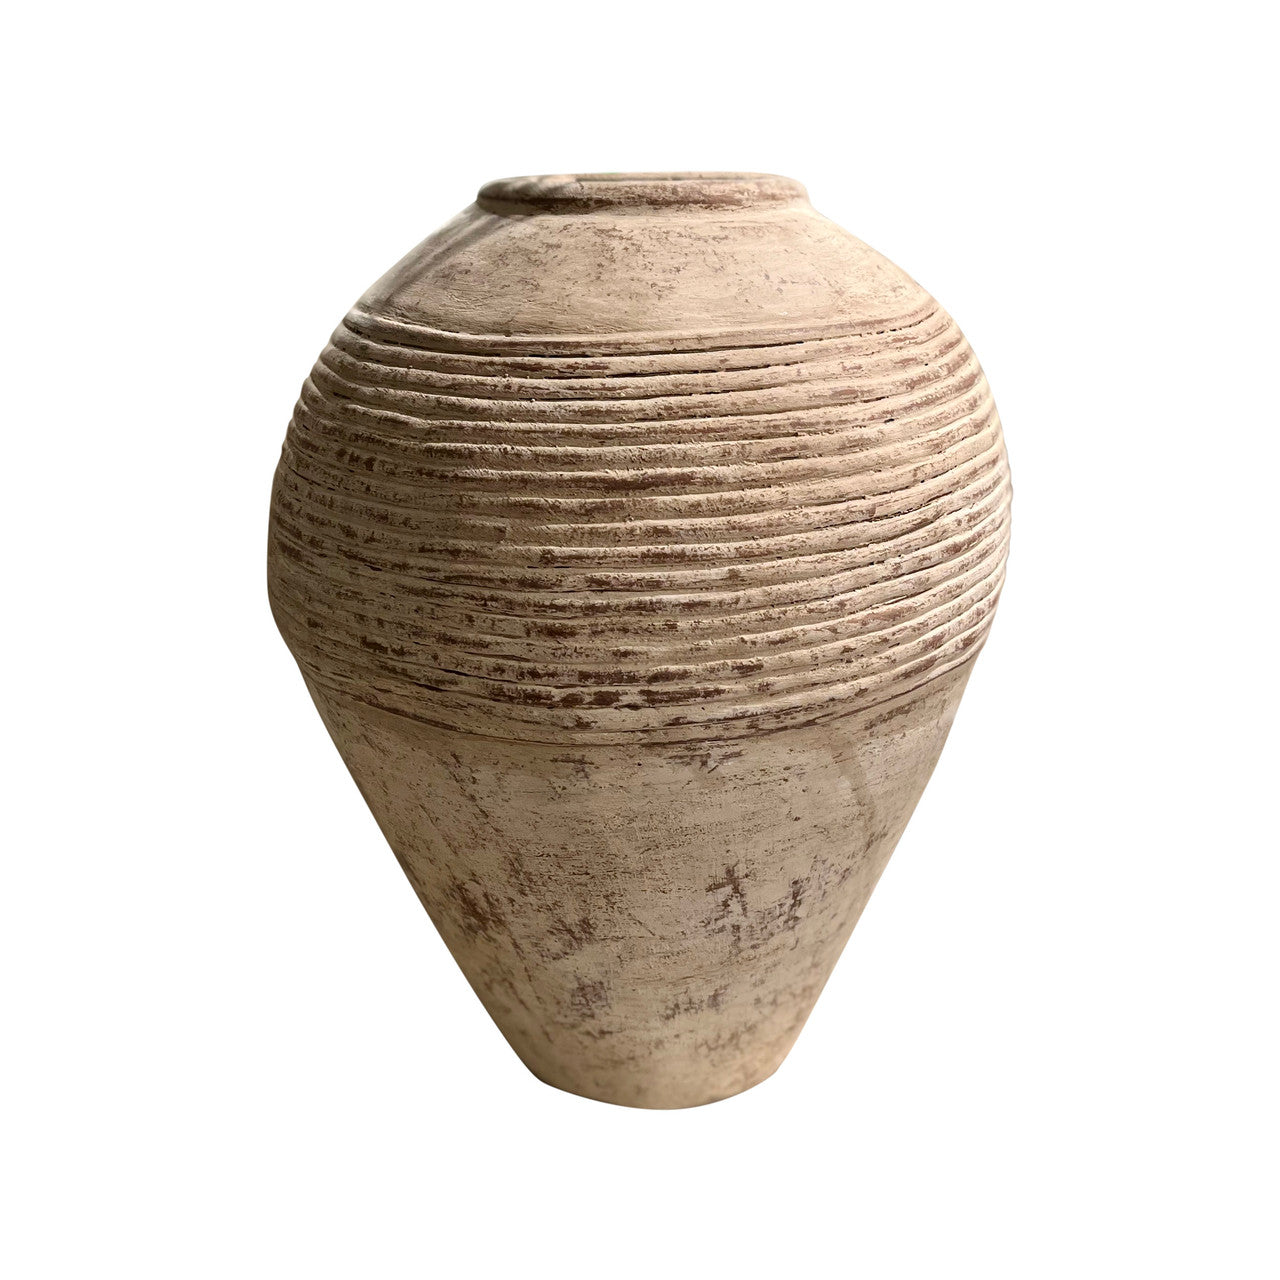 Tribe Water Jar With Stripes